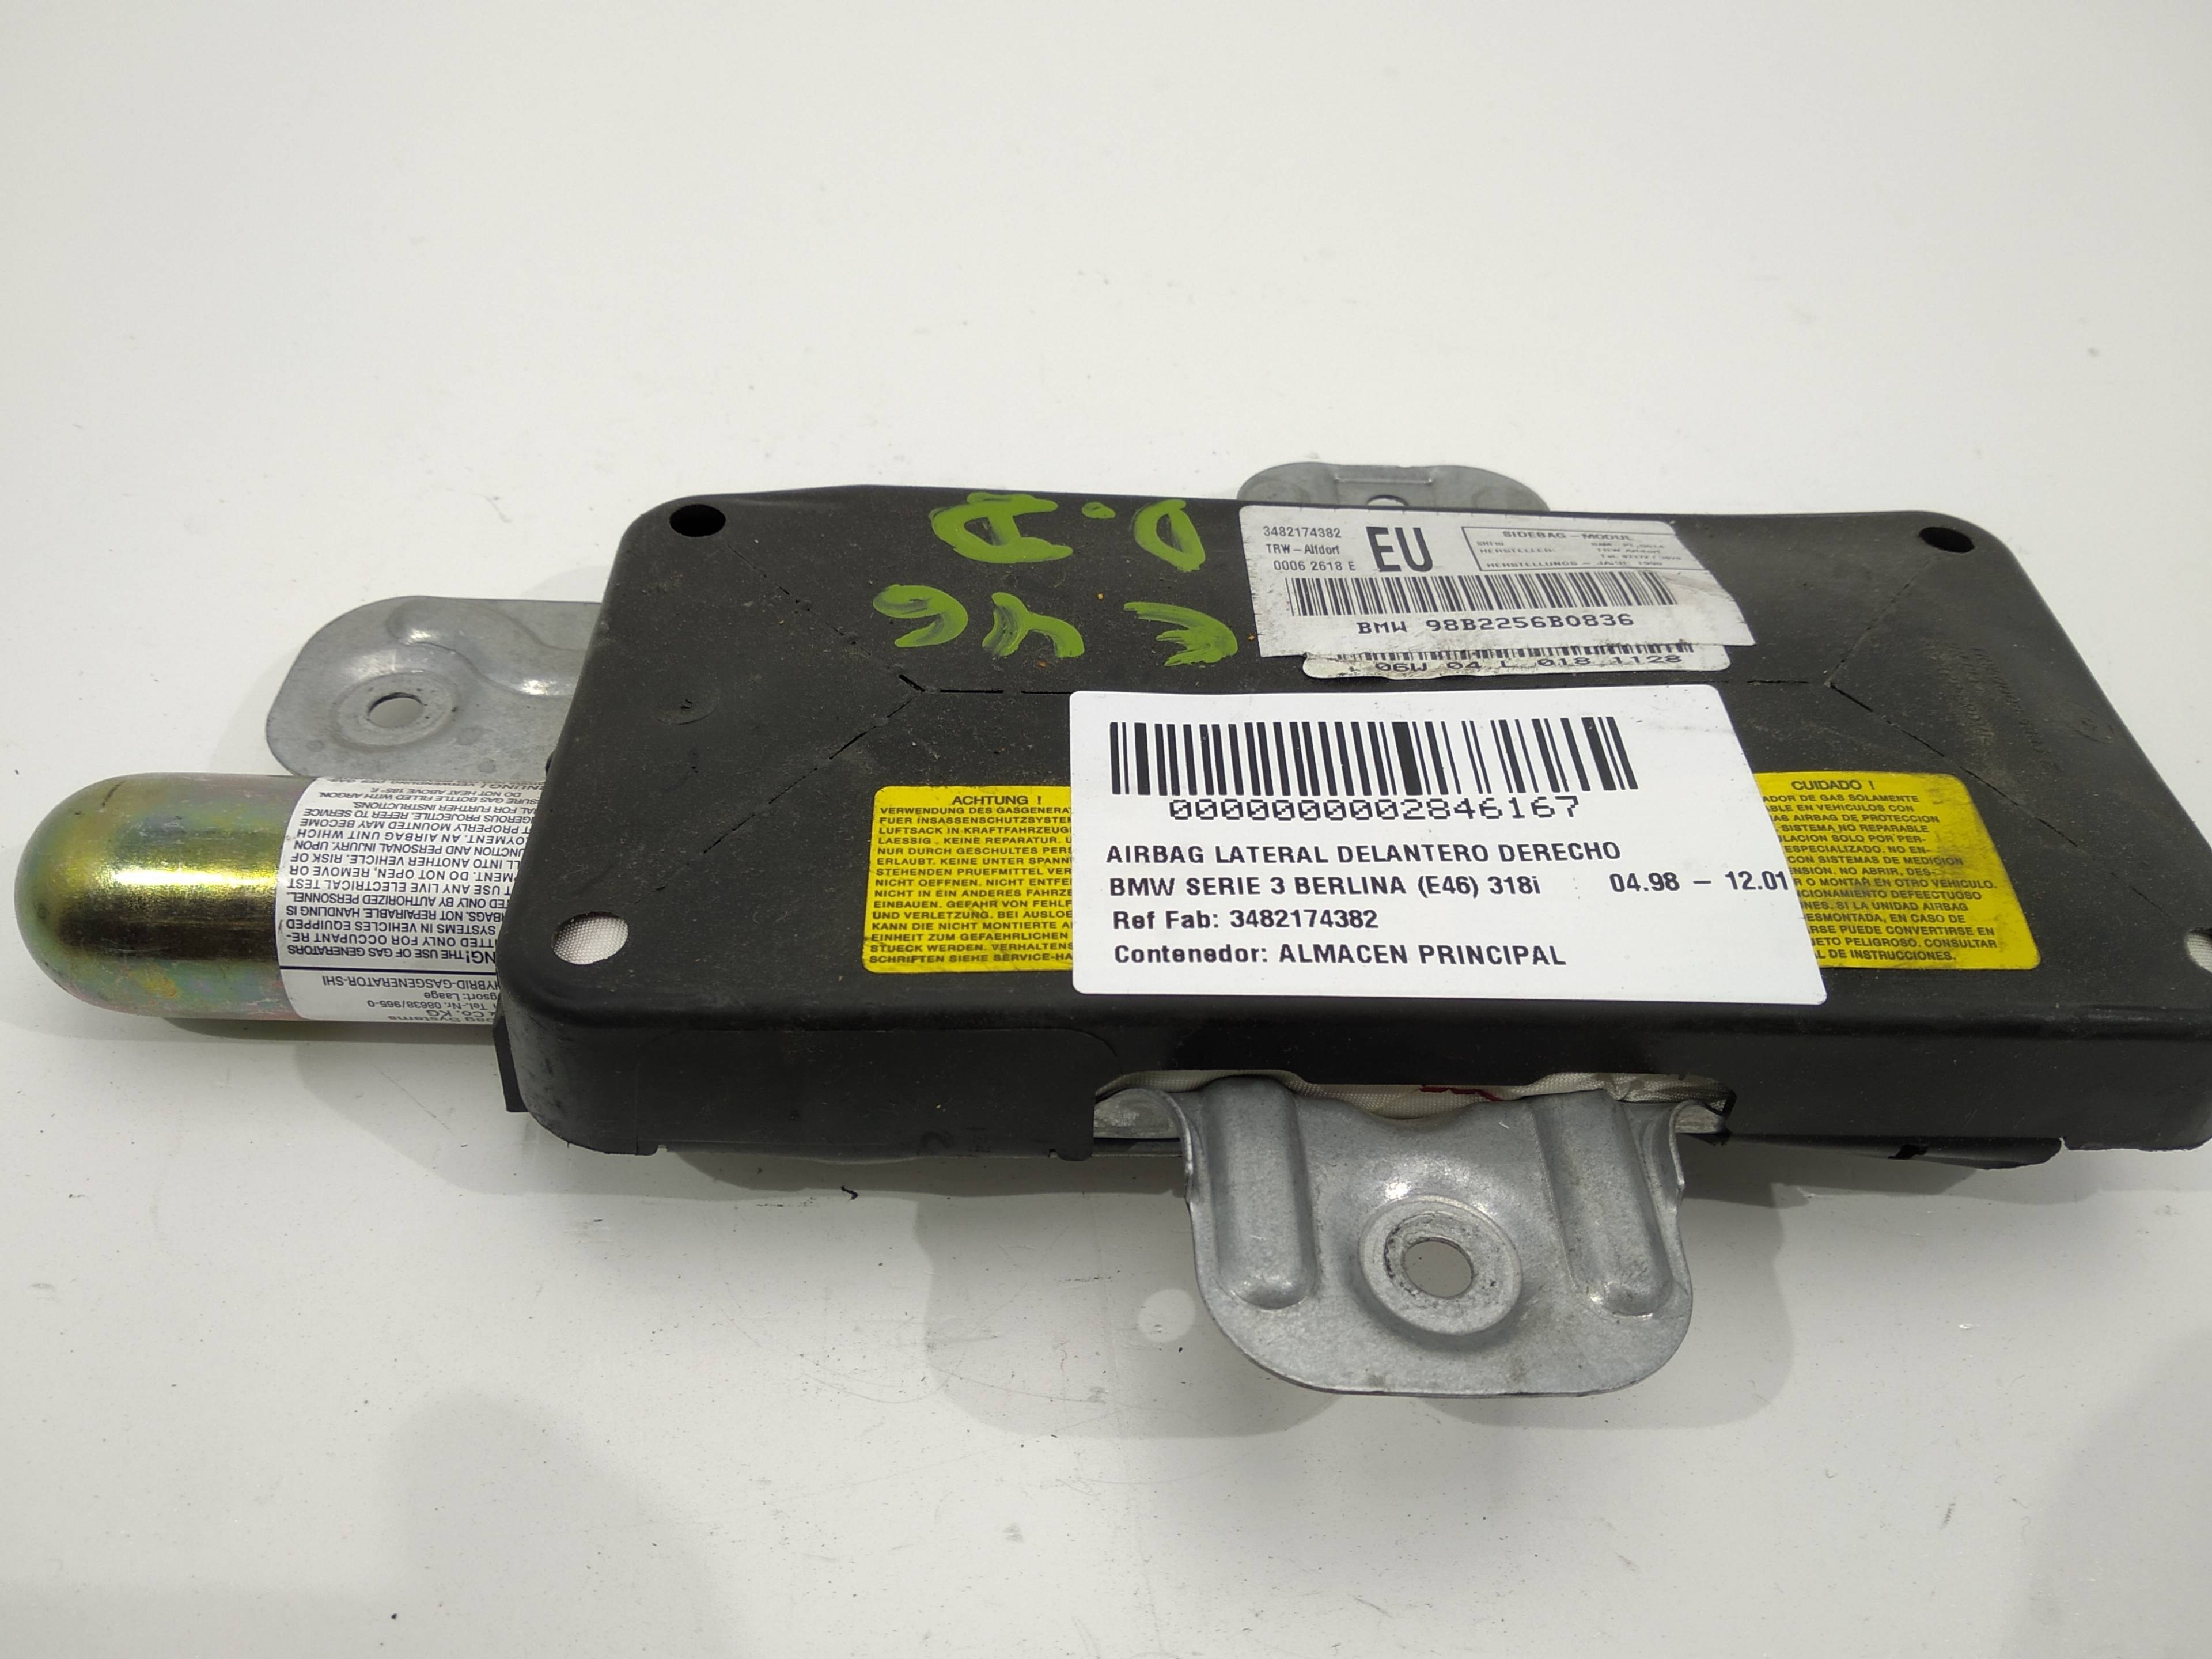 BMW 3 Series E46 (1997-2006) Front Right Door Airbag SRS 3482174382, 3482174382, 3482174382 19333723